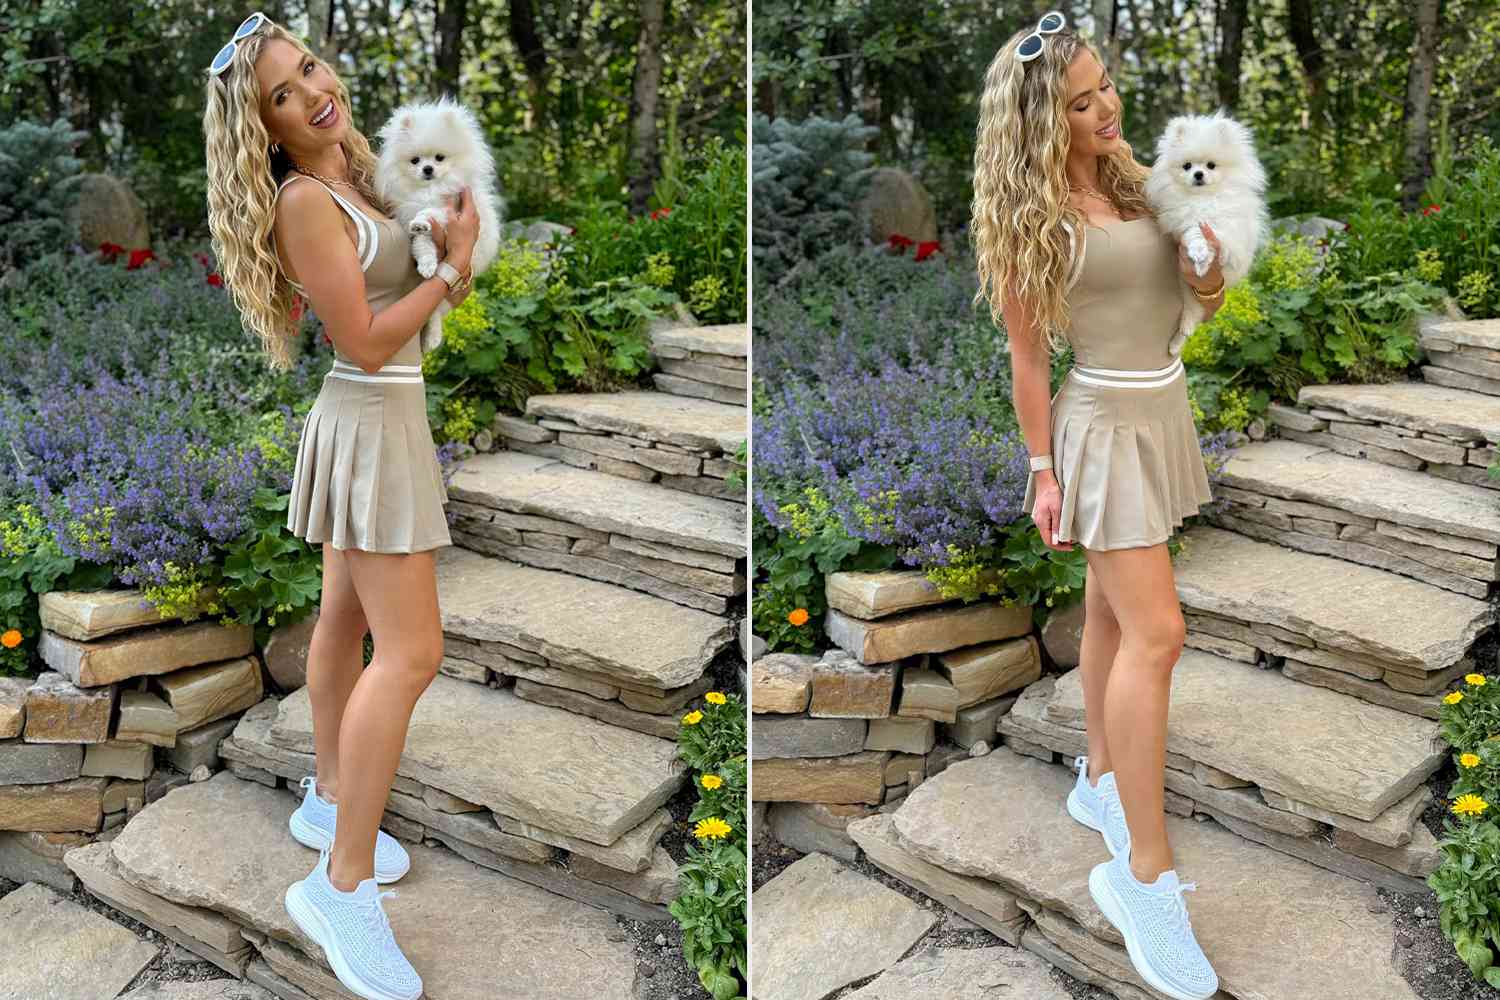 Chiefs Owner's Daughter Gracie Hunt Gives Pickleball Princess in Pleated Skort Set: 'Slow Summer Saturdays'